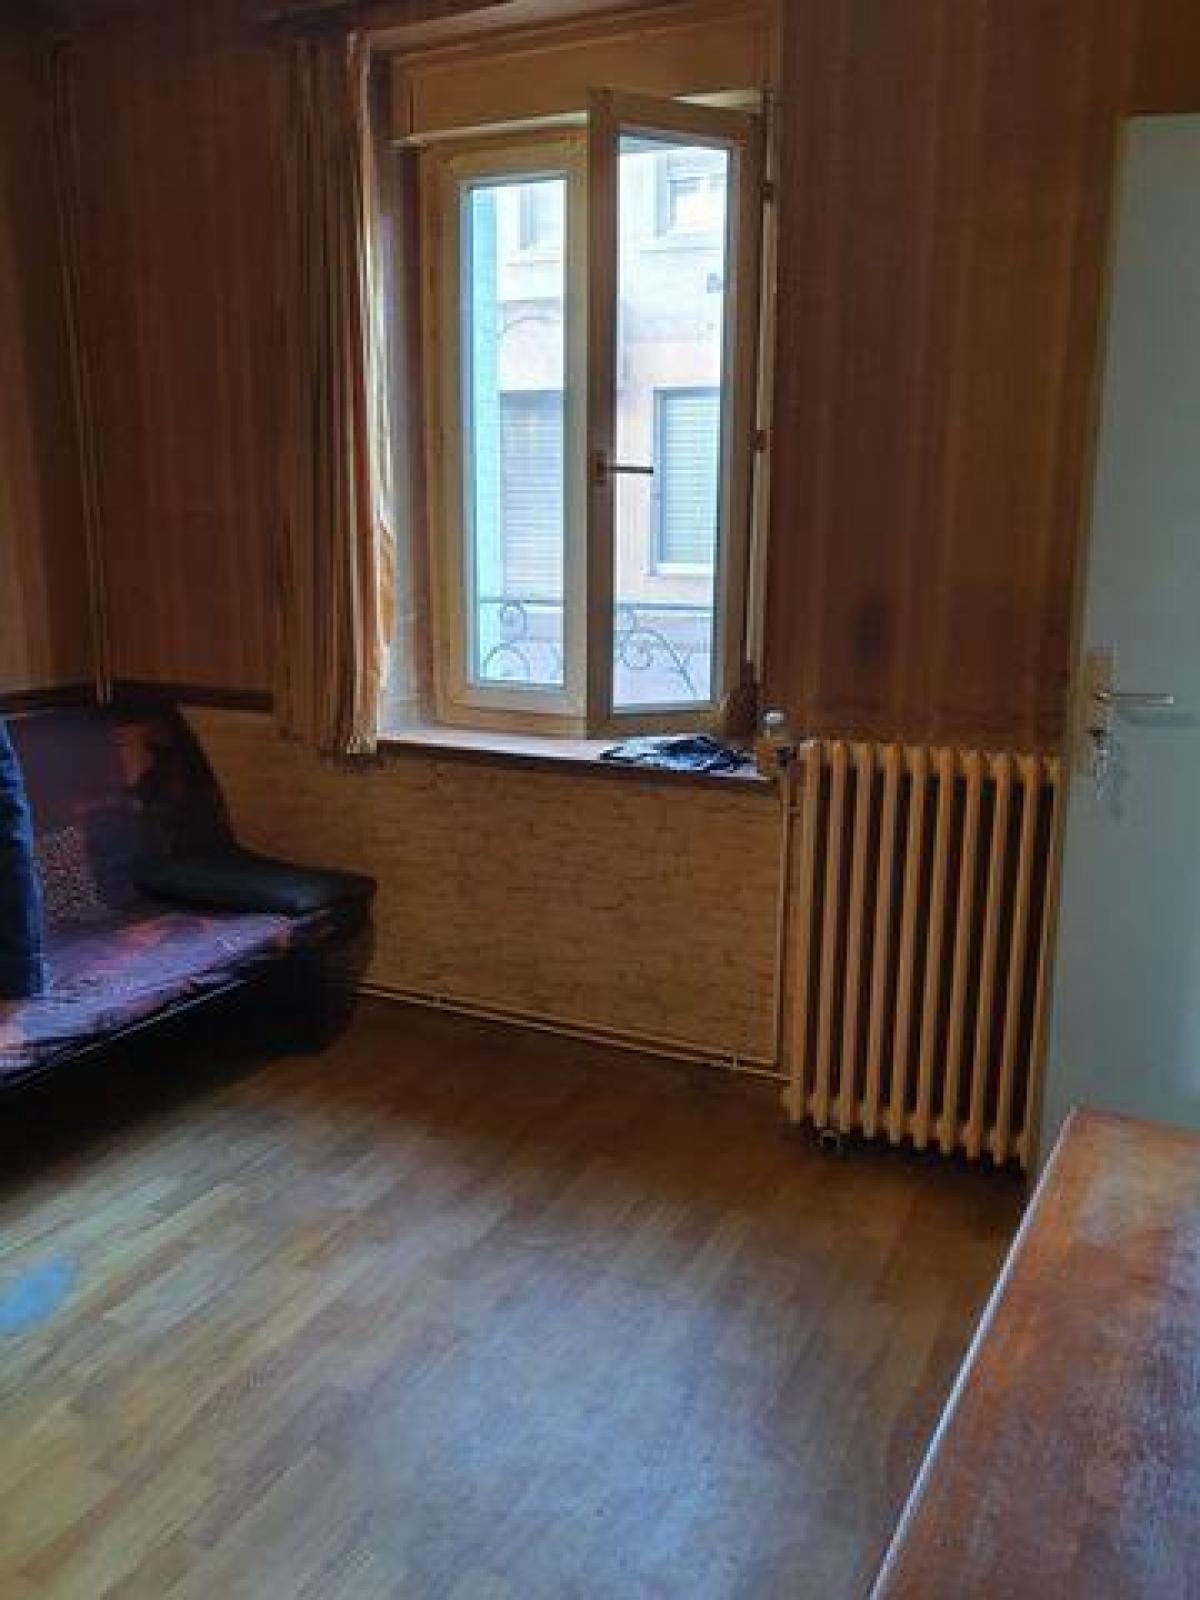 Picture of Apartment For Sale in Vittel, Lorraine, France